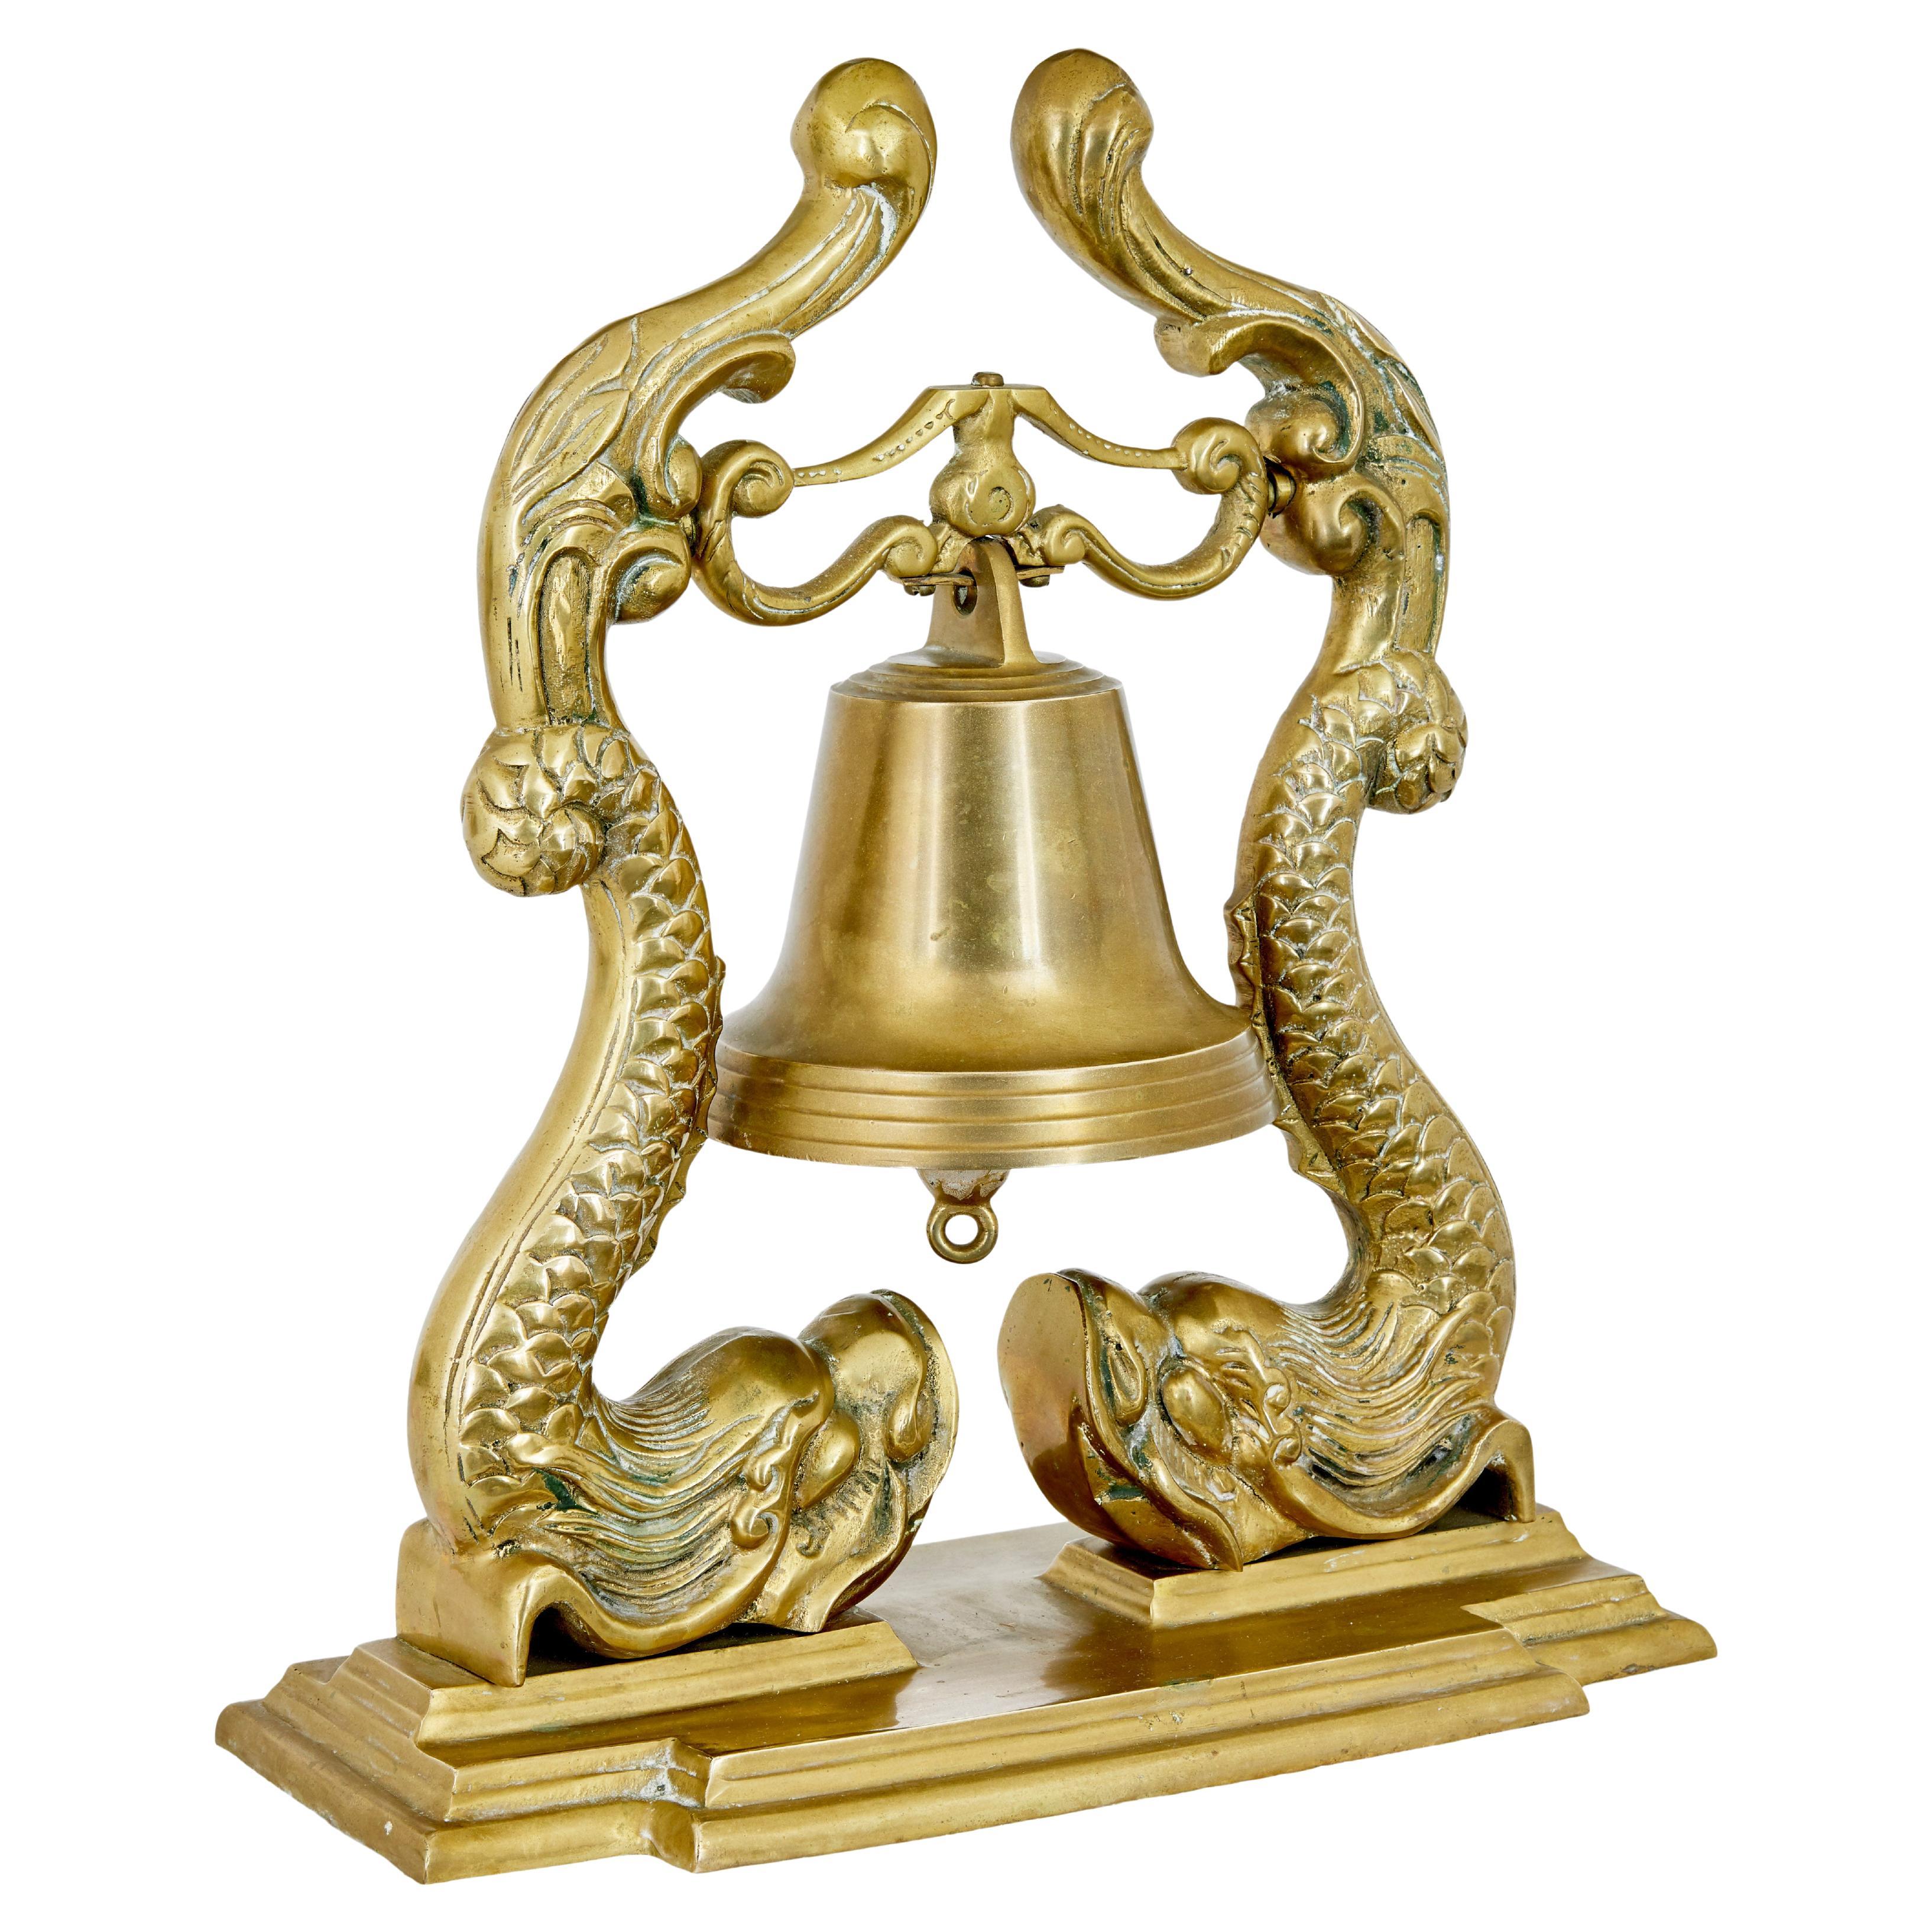 19th century Victorian brass decorative dinner bell For Sale